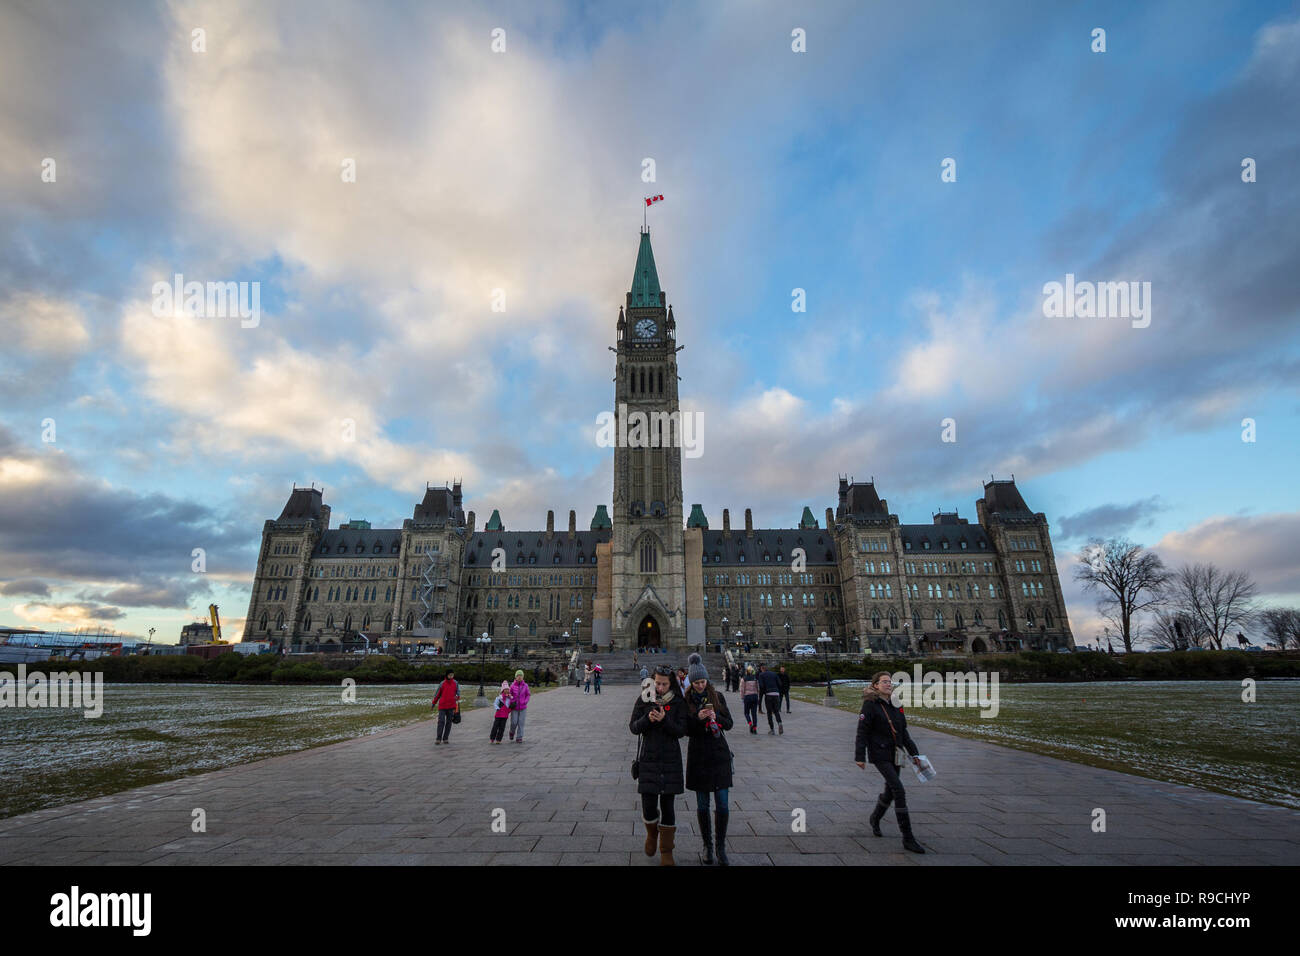 OTTAWA, CANADA - NOVEMBER 10, 2018: Tourists standing on front of the center bloc of the Parliament of Canada, with its Main clock tower. in the Canad Stock Photo